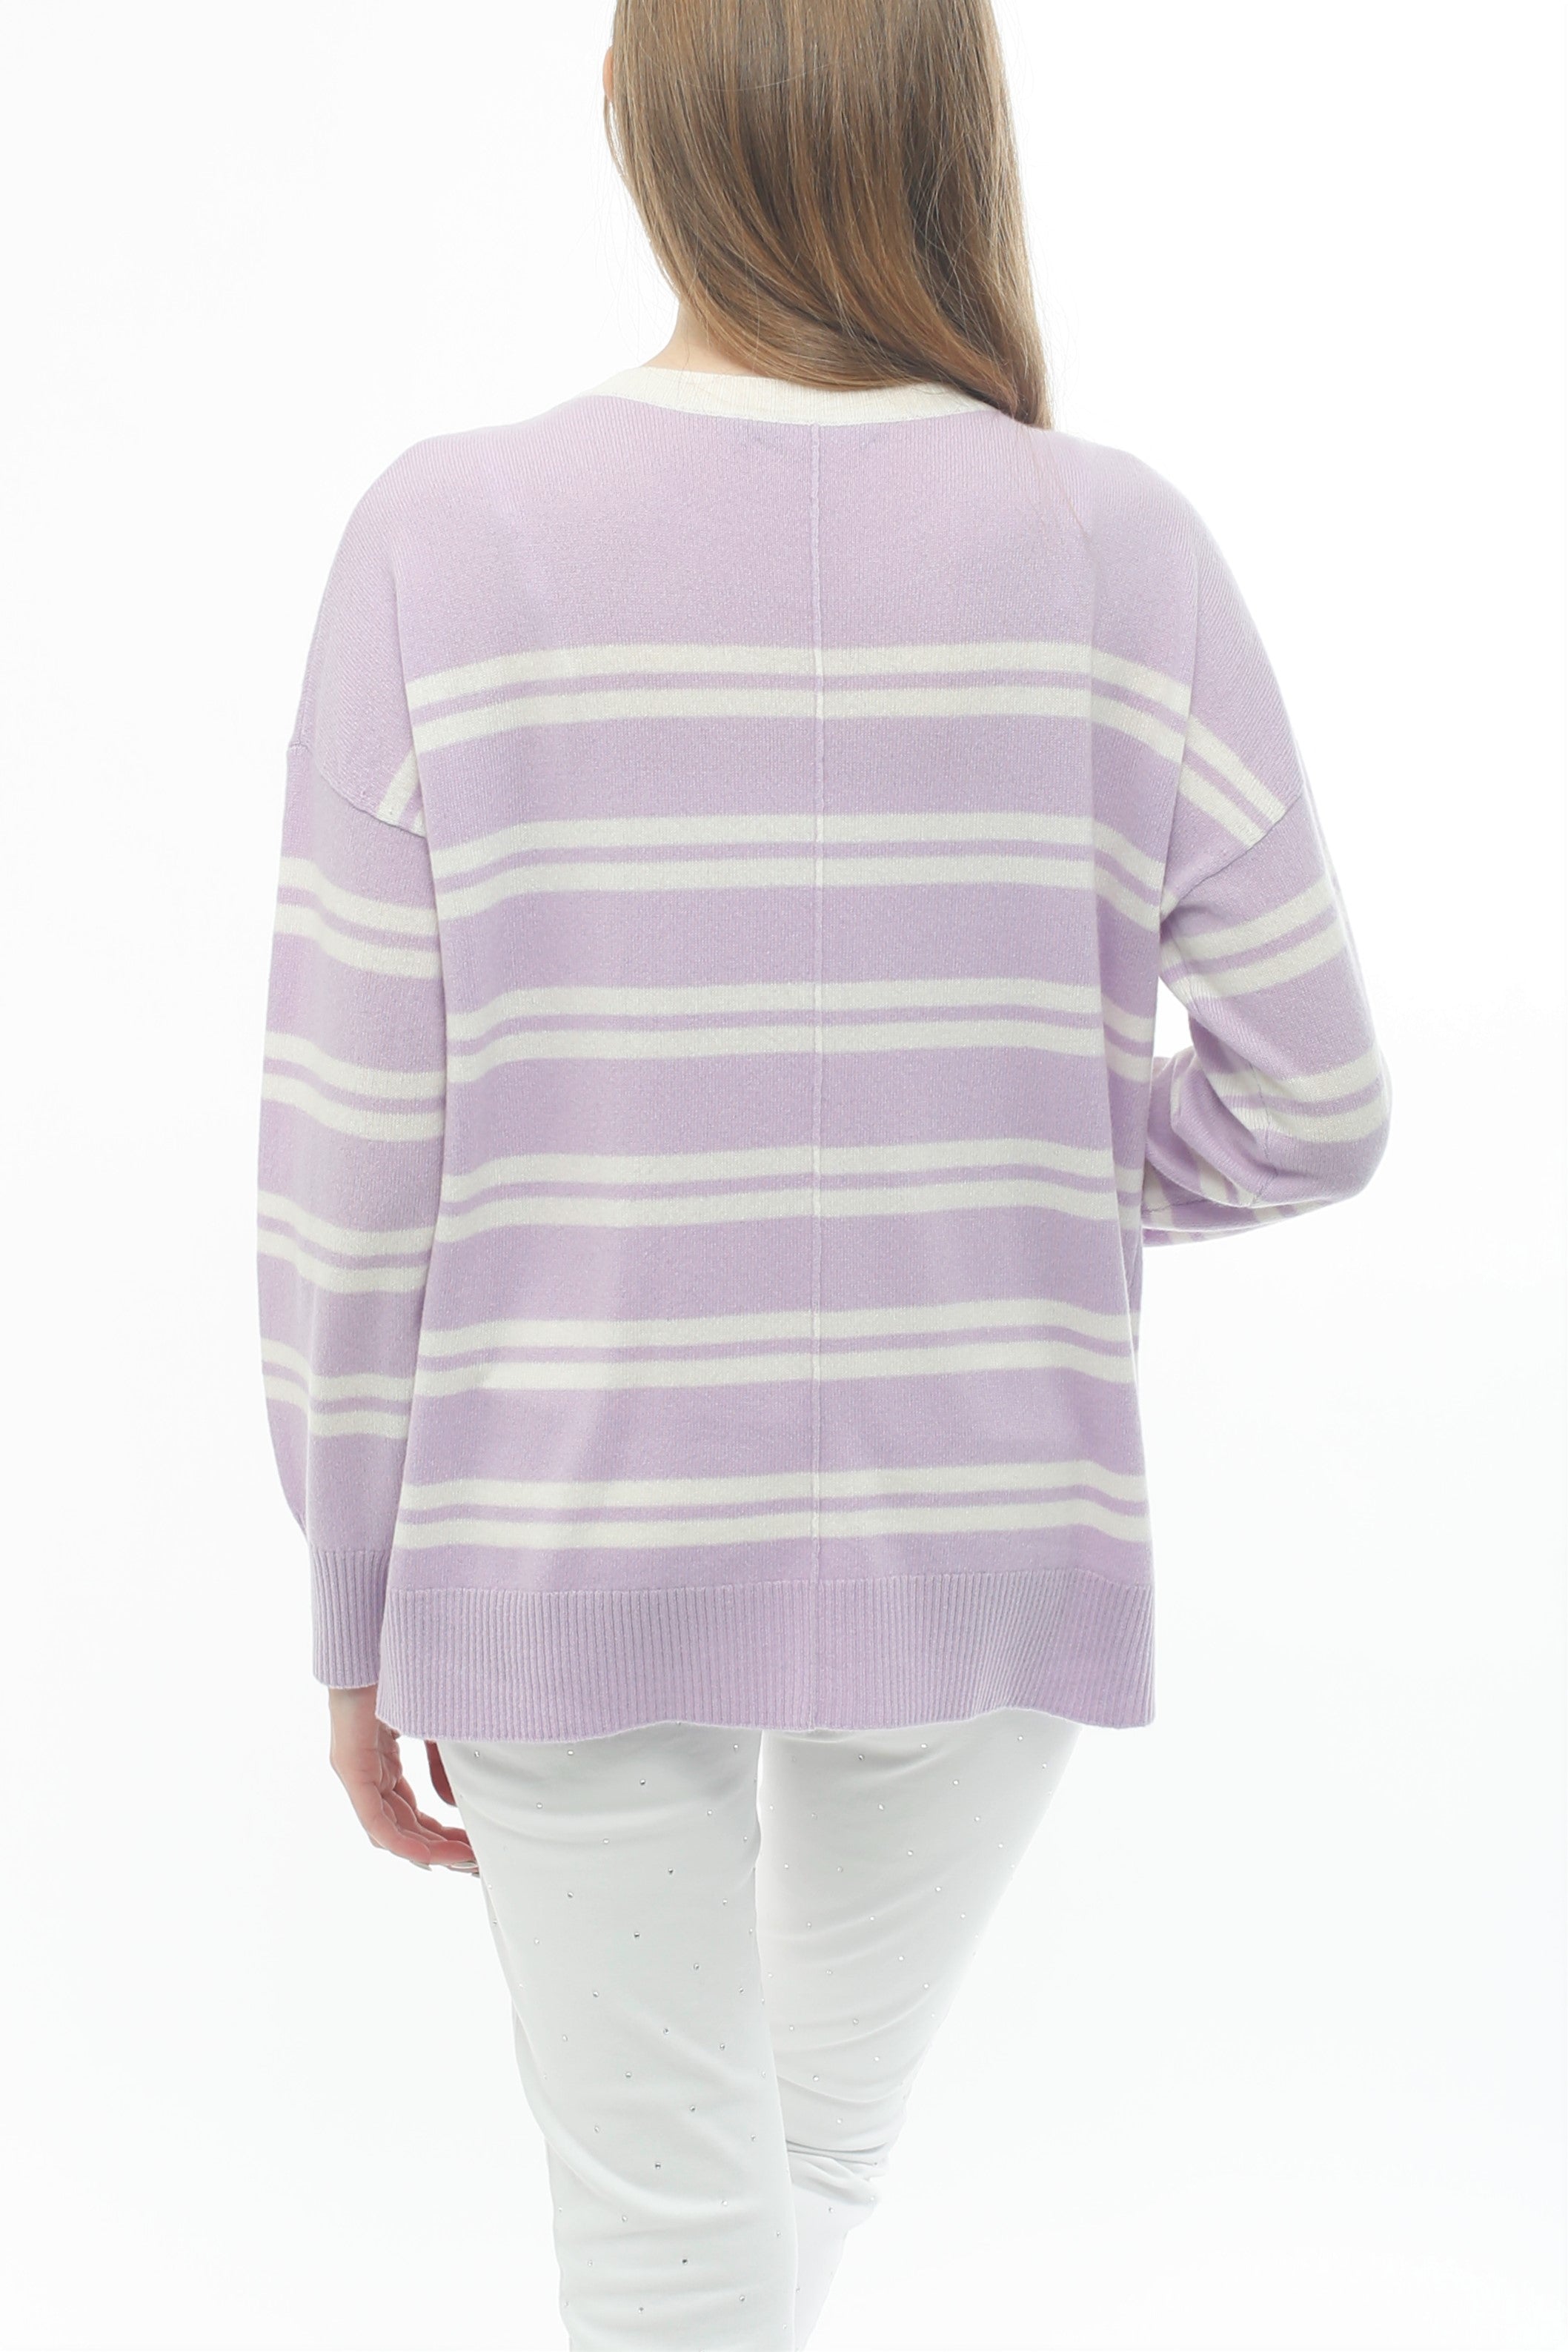 100% Cashmere Stripe With Side Button Detail